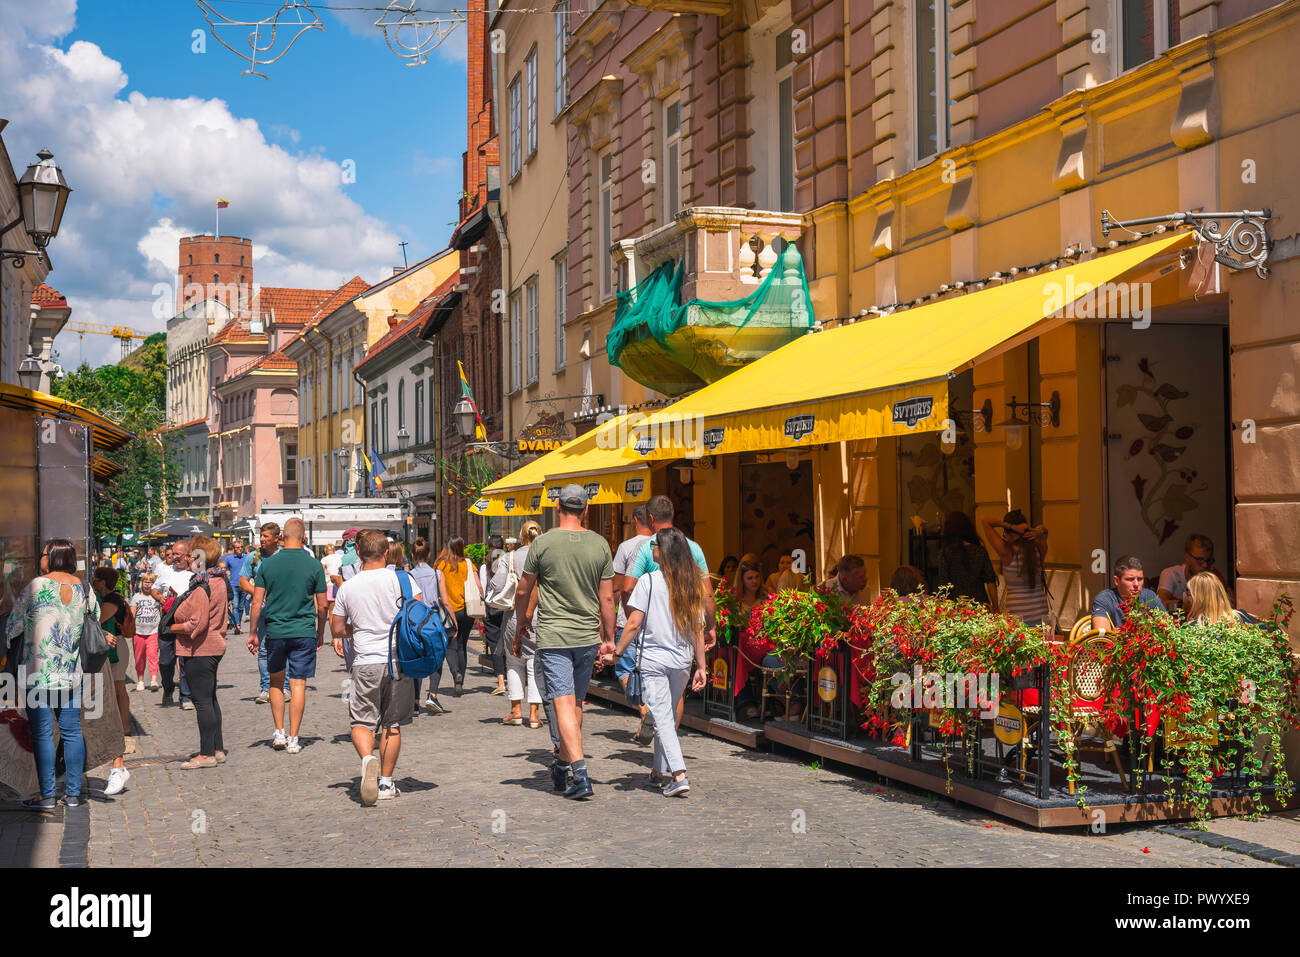 Vilnius old town, view in summer along scenic Pilies Gatve, the main thoroughfare in the center of the historical Old Town area of Vilnius, Lithuania. Stock Photo